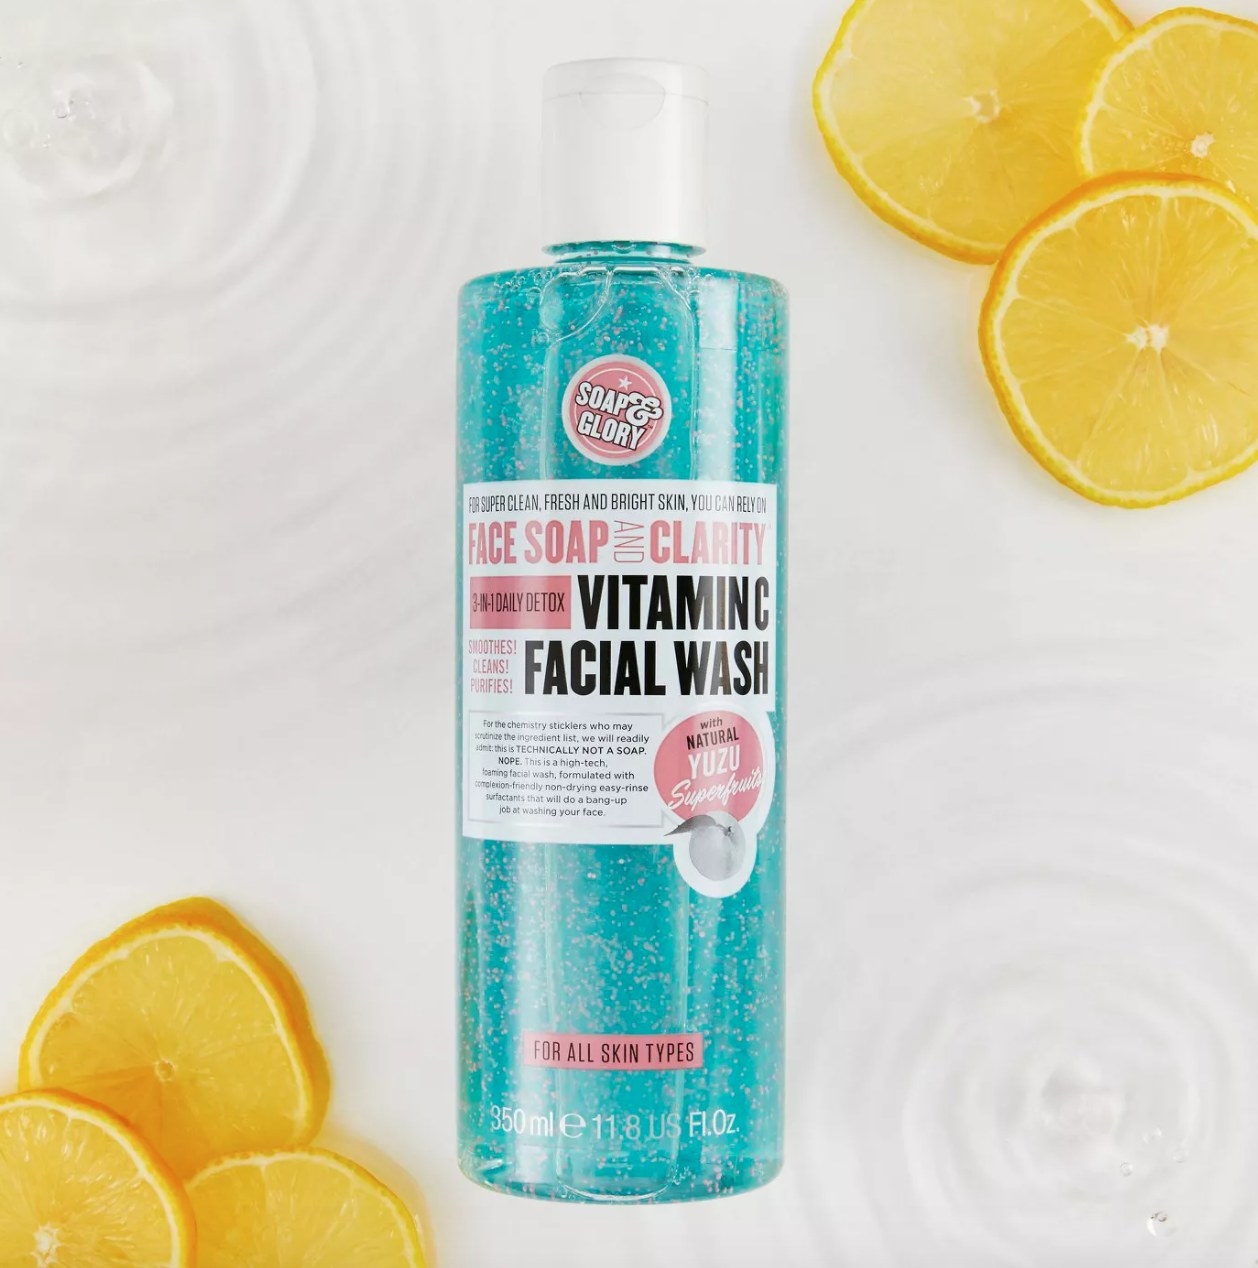 Soap and Glory face cleanser near lemon slices